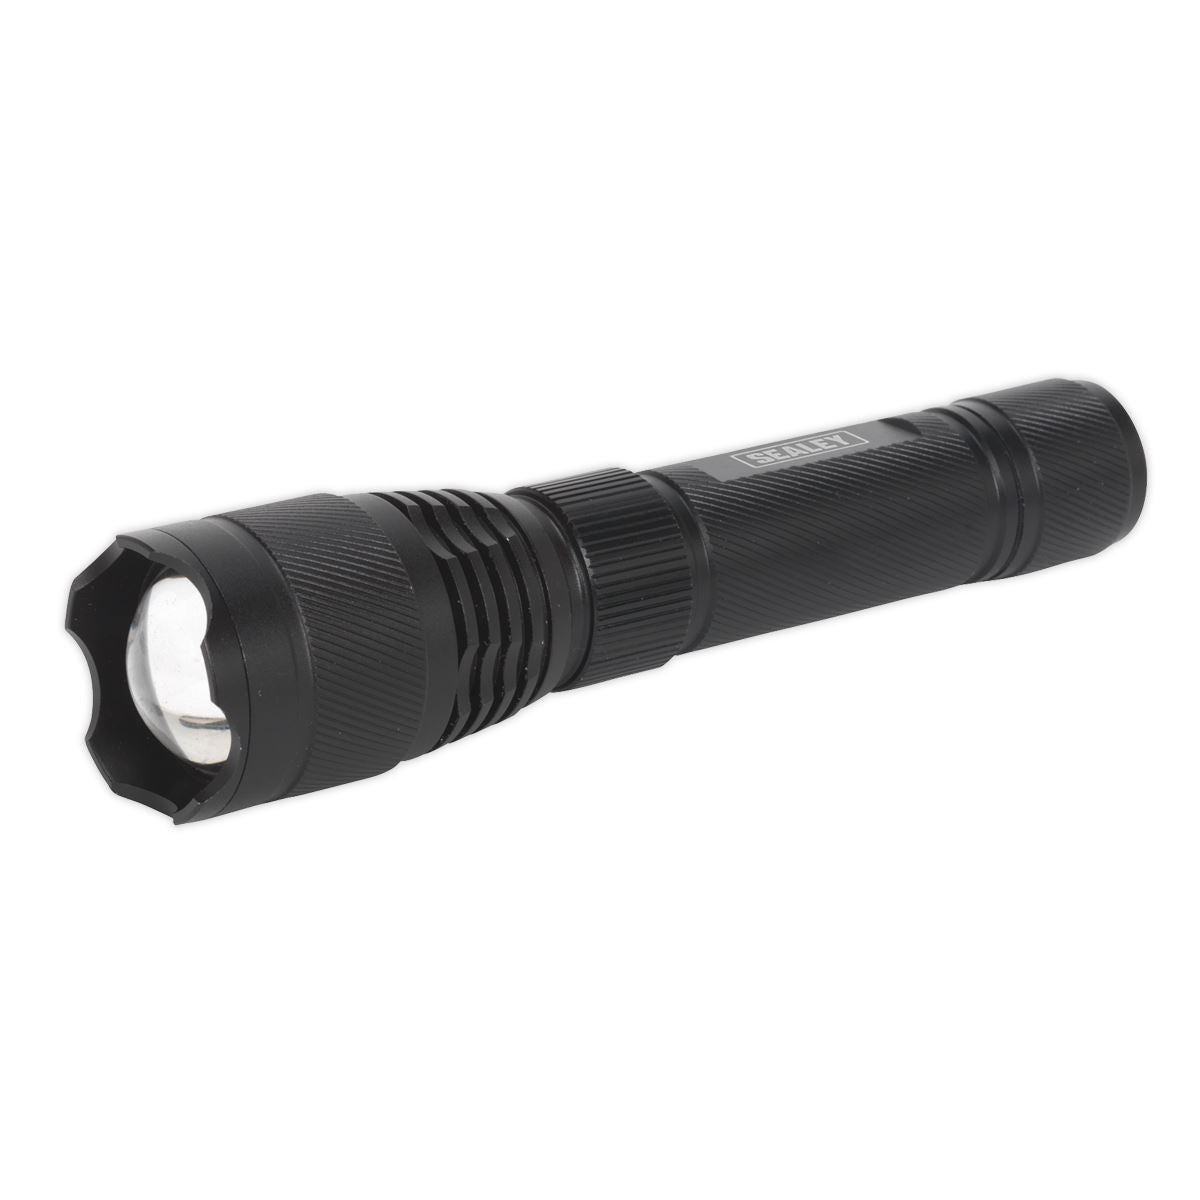 Sealey 10W T6 Cree LED Rechargeable Aluminium Torch 500 Lumens Adjustable Focus